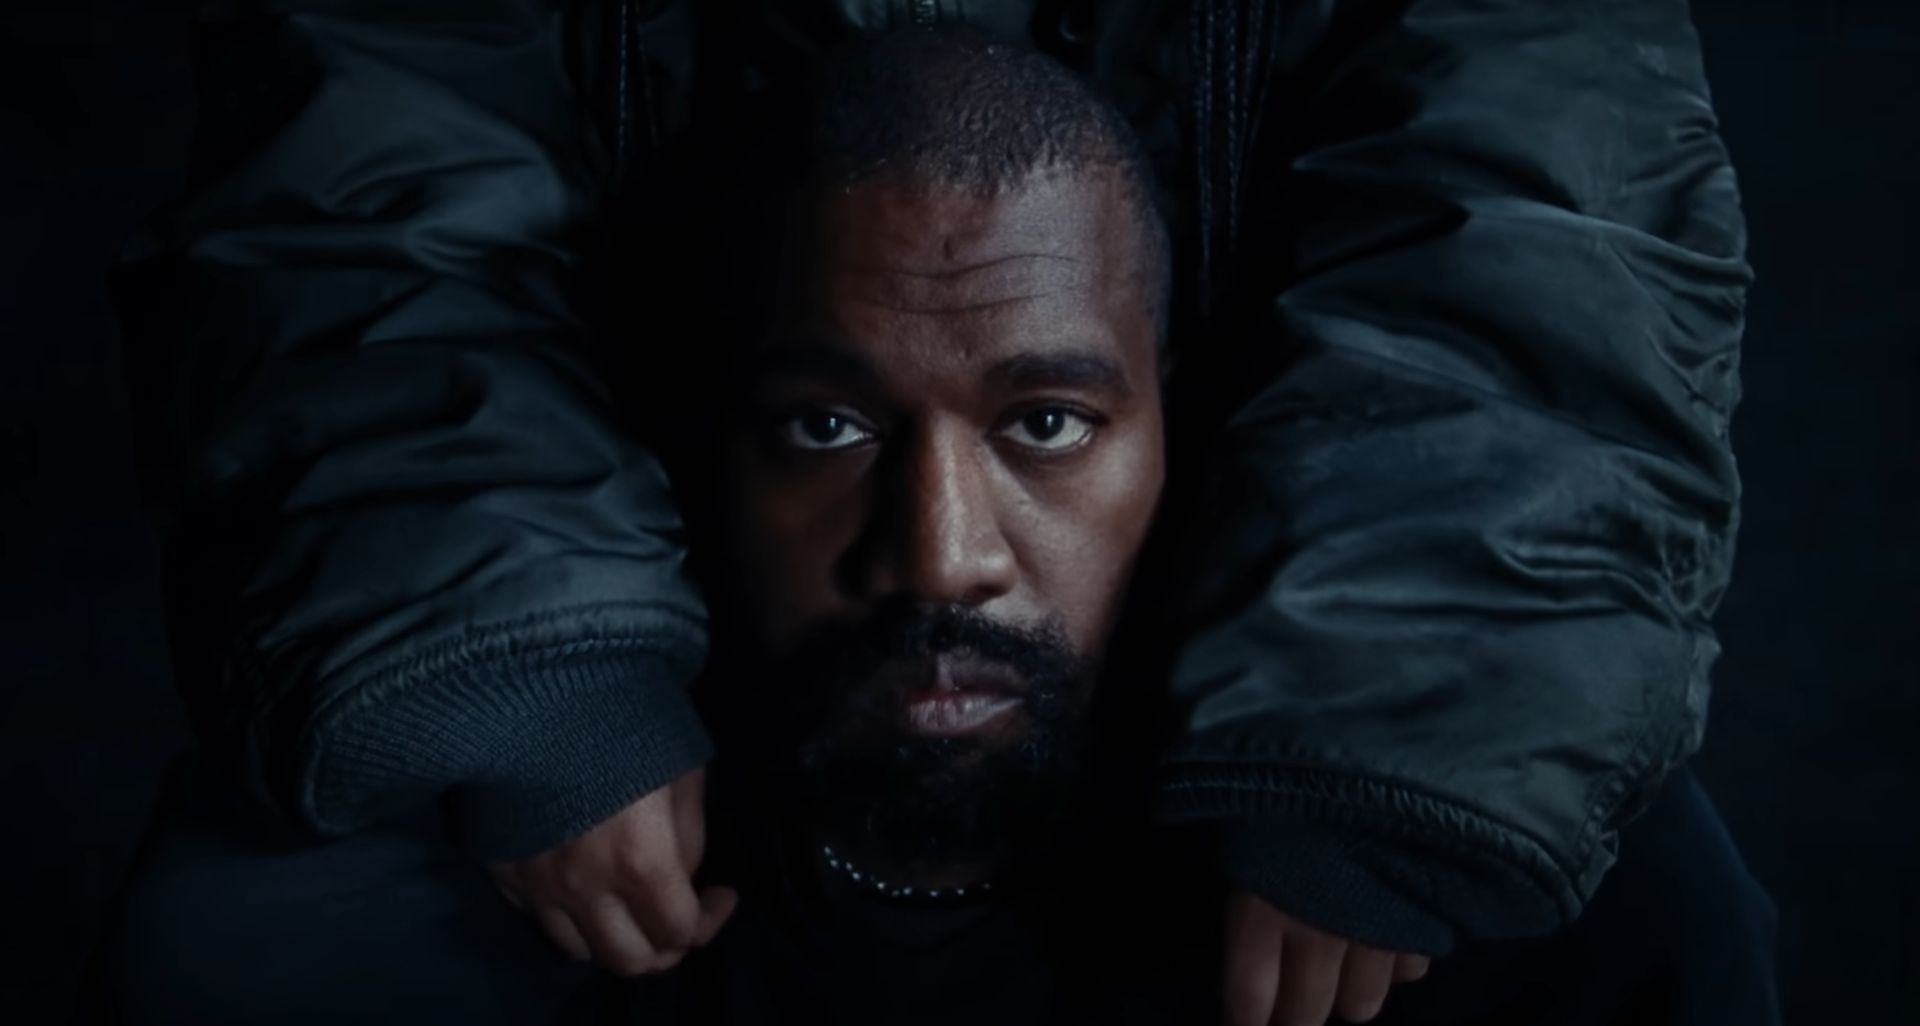 How to watch Kanye listening party?